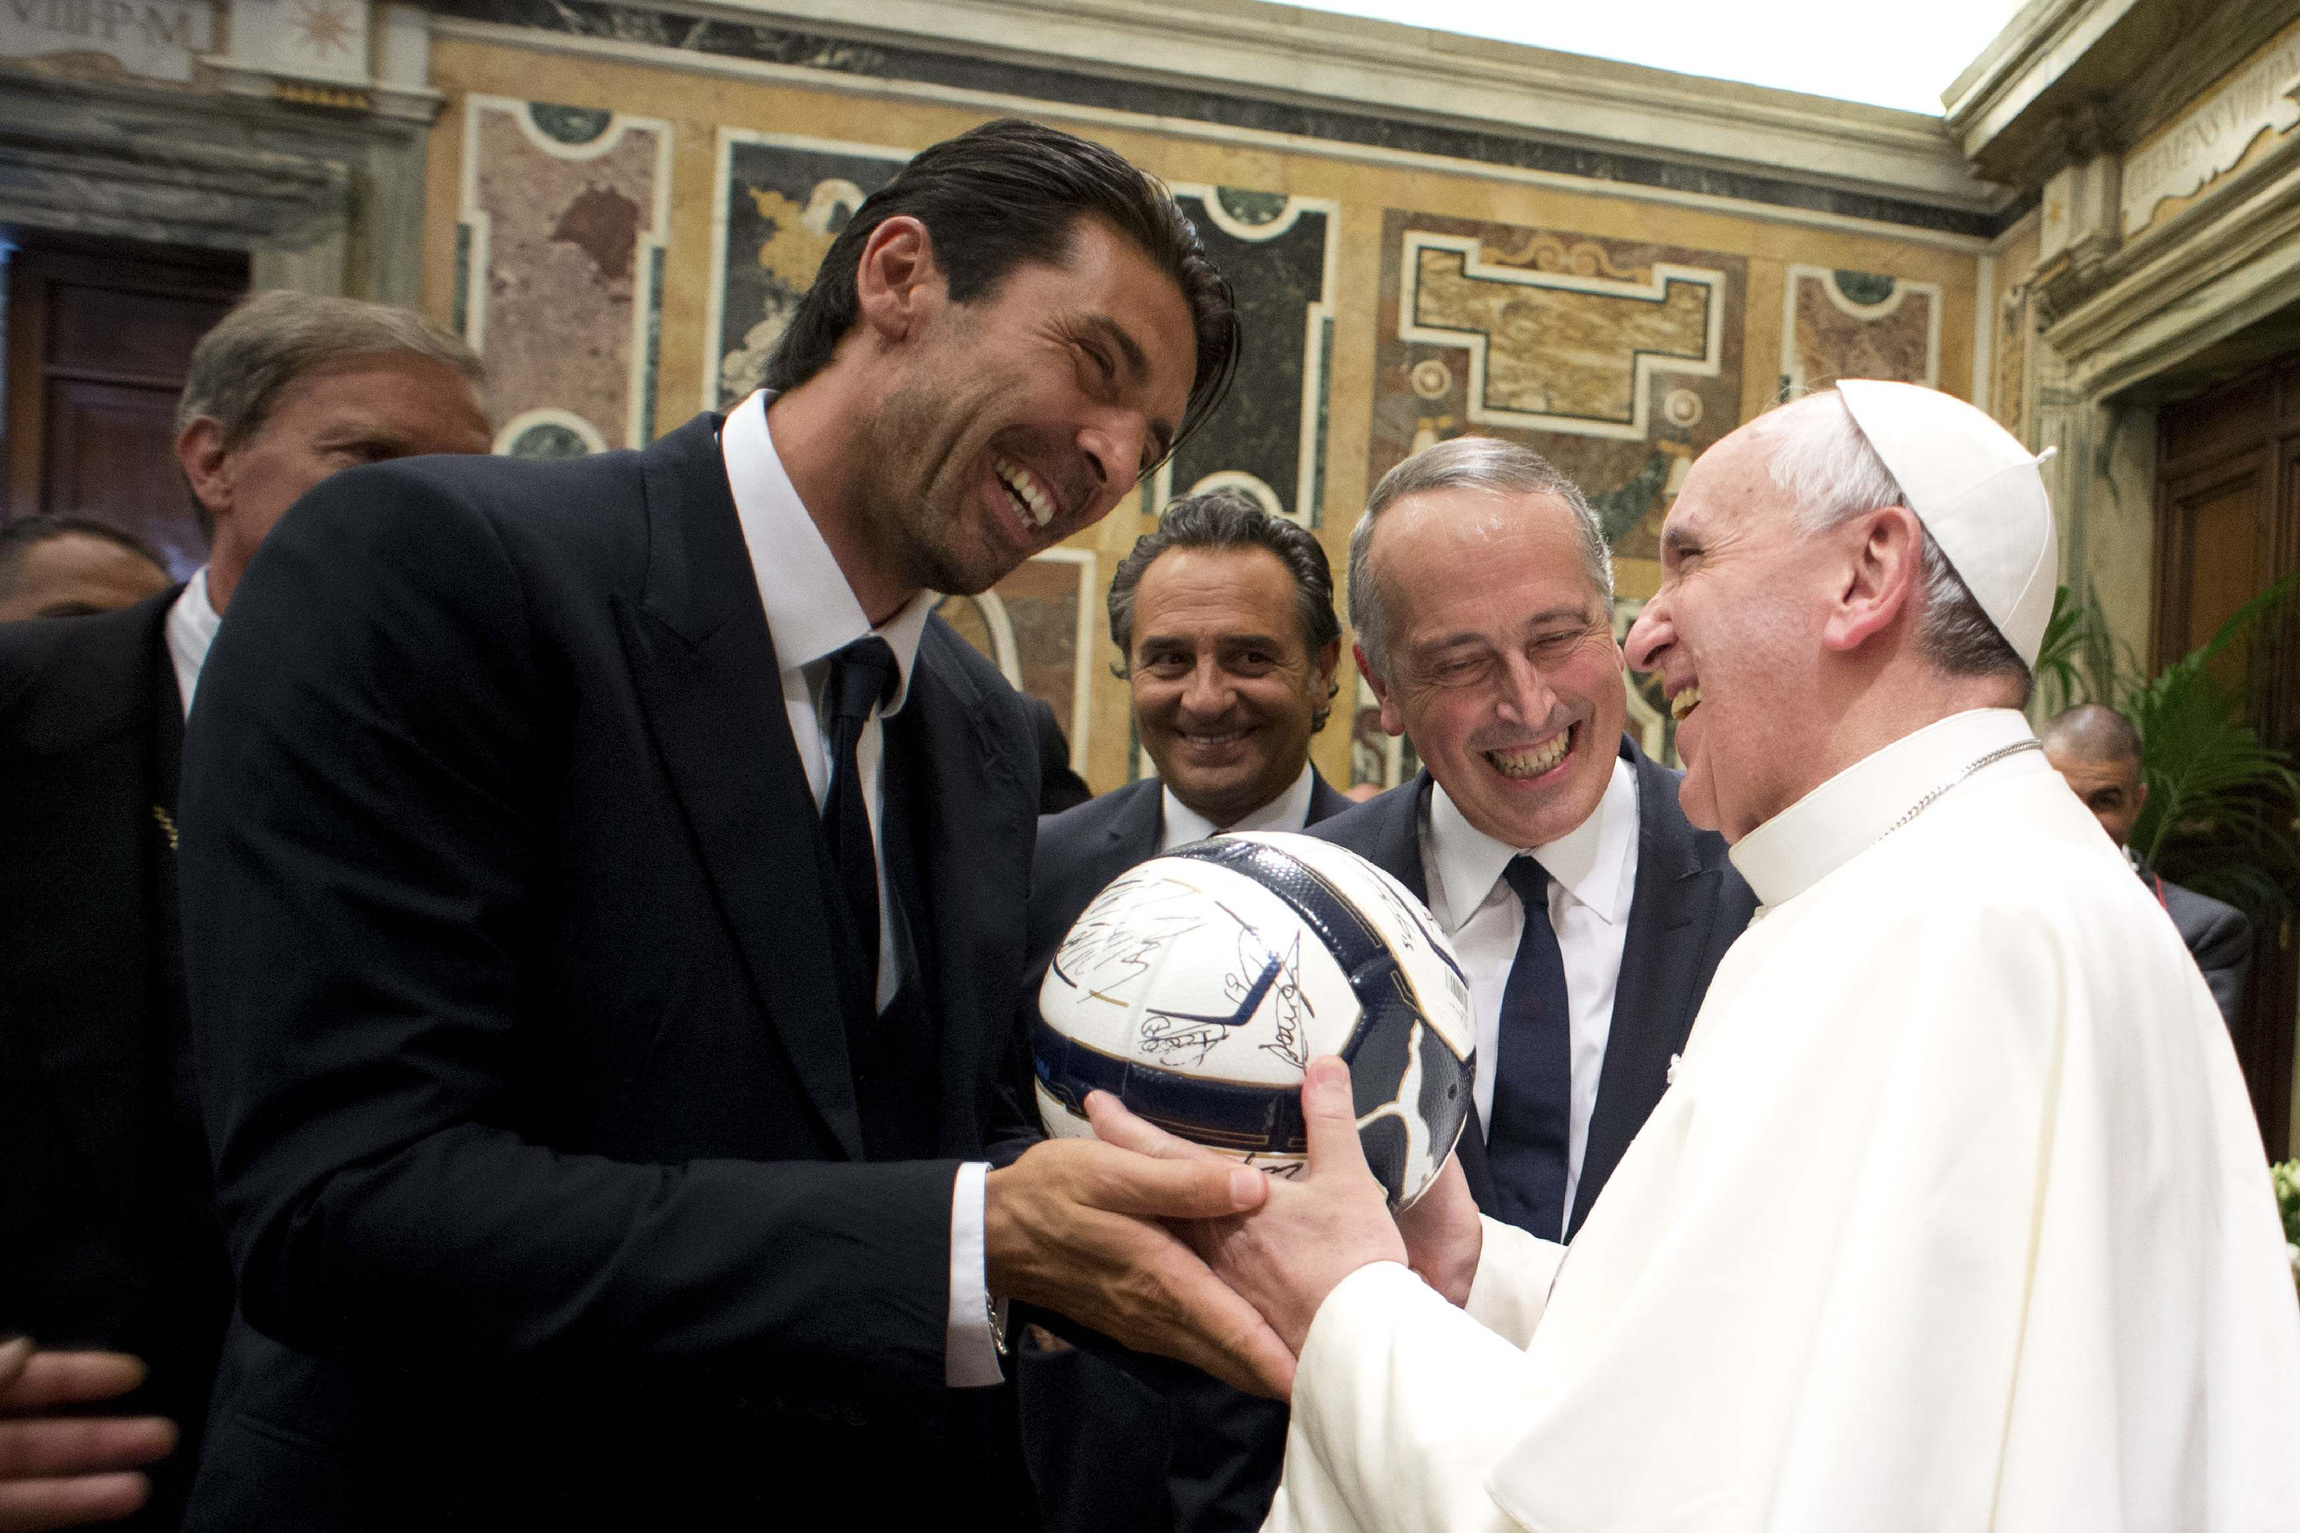 Pope Francis receives a soccer ball as gift from Italy's goalkeeper and captain, Gianluigi Buffon, during a private audience at the Vatican Aug. 13. Argentina will play Italy in a friendly soccer match Aug. 14 in the pope's honor. (CNS photo/L'Osservatore Romano via Reuters) 